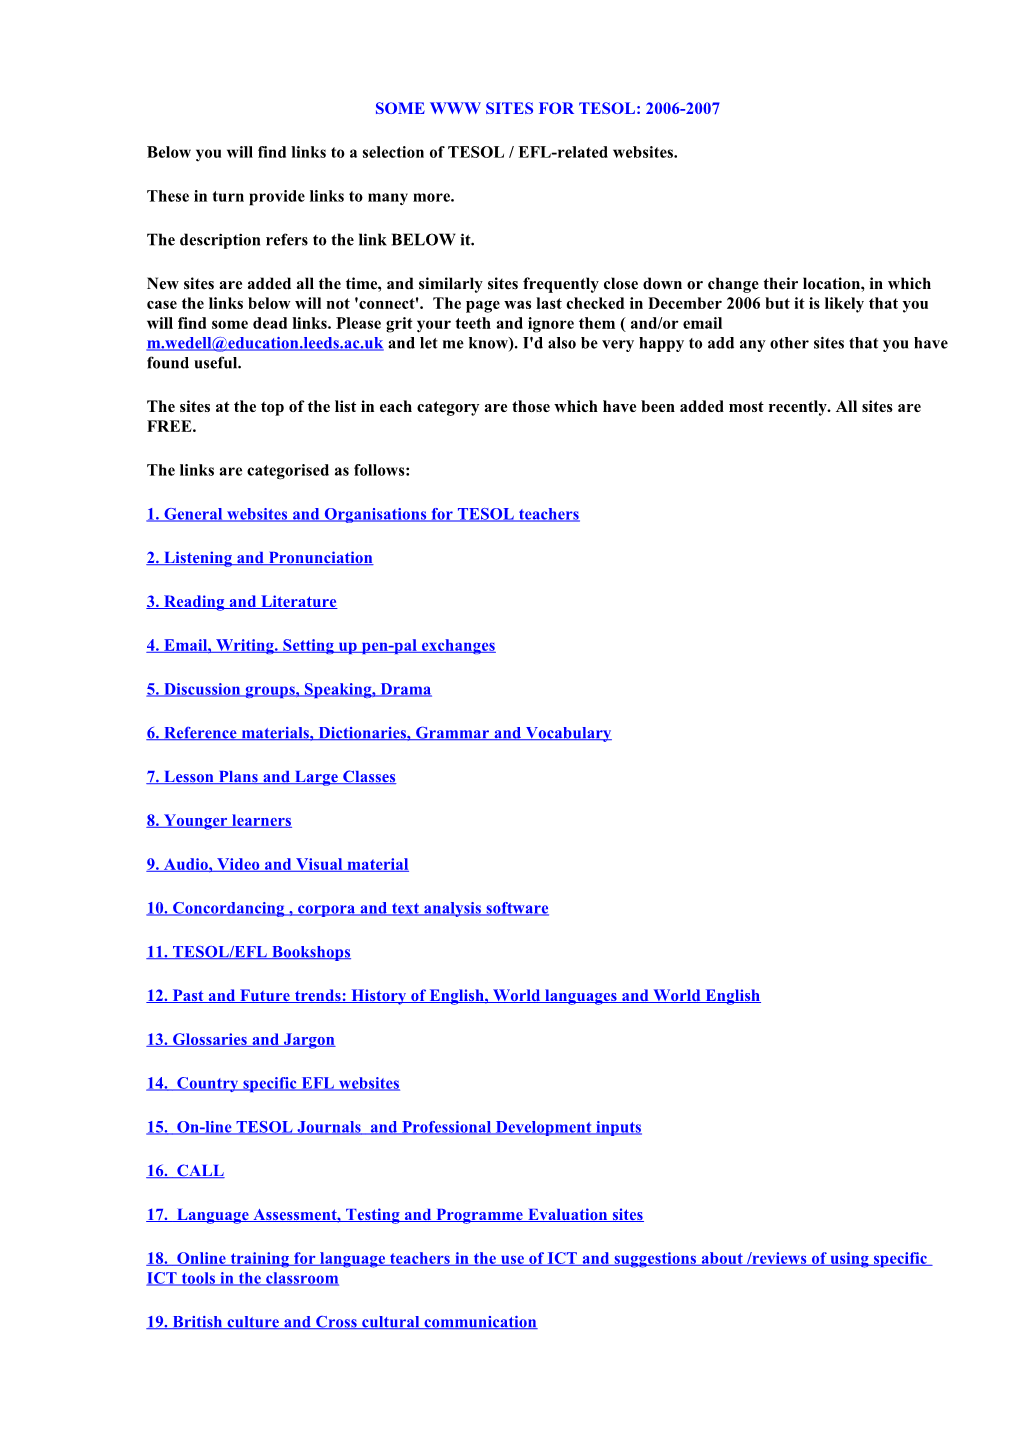 Some Www Sites for Tesol: 2006-2007